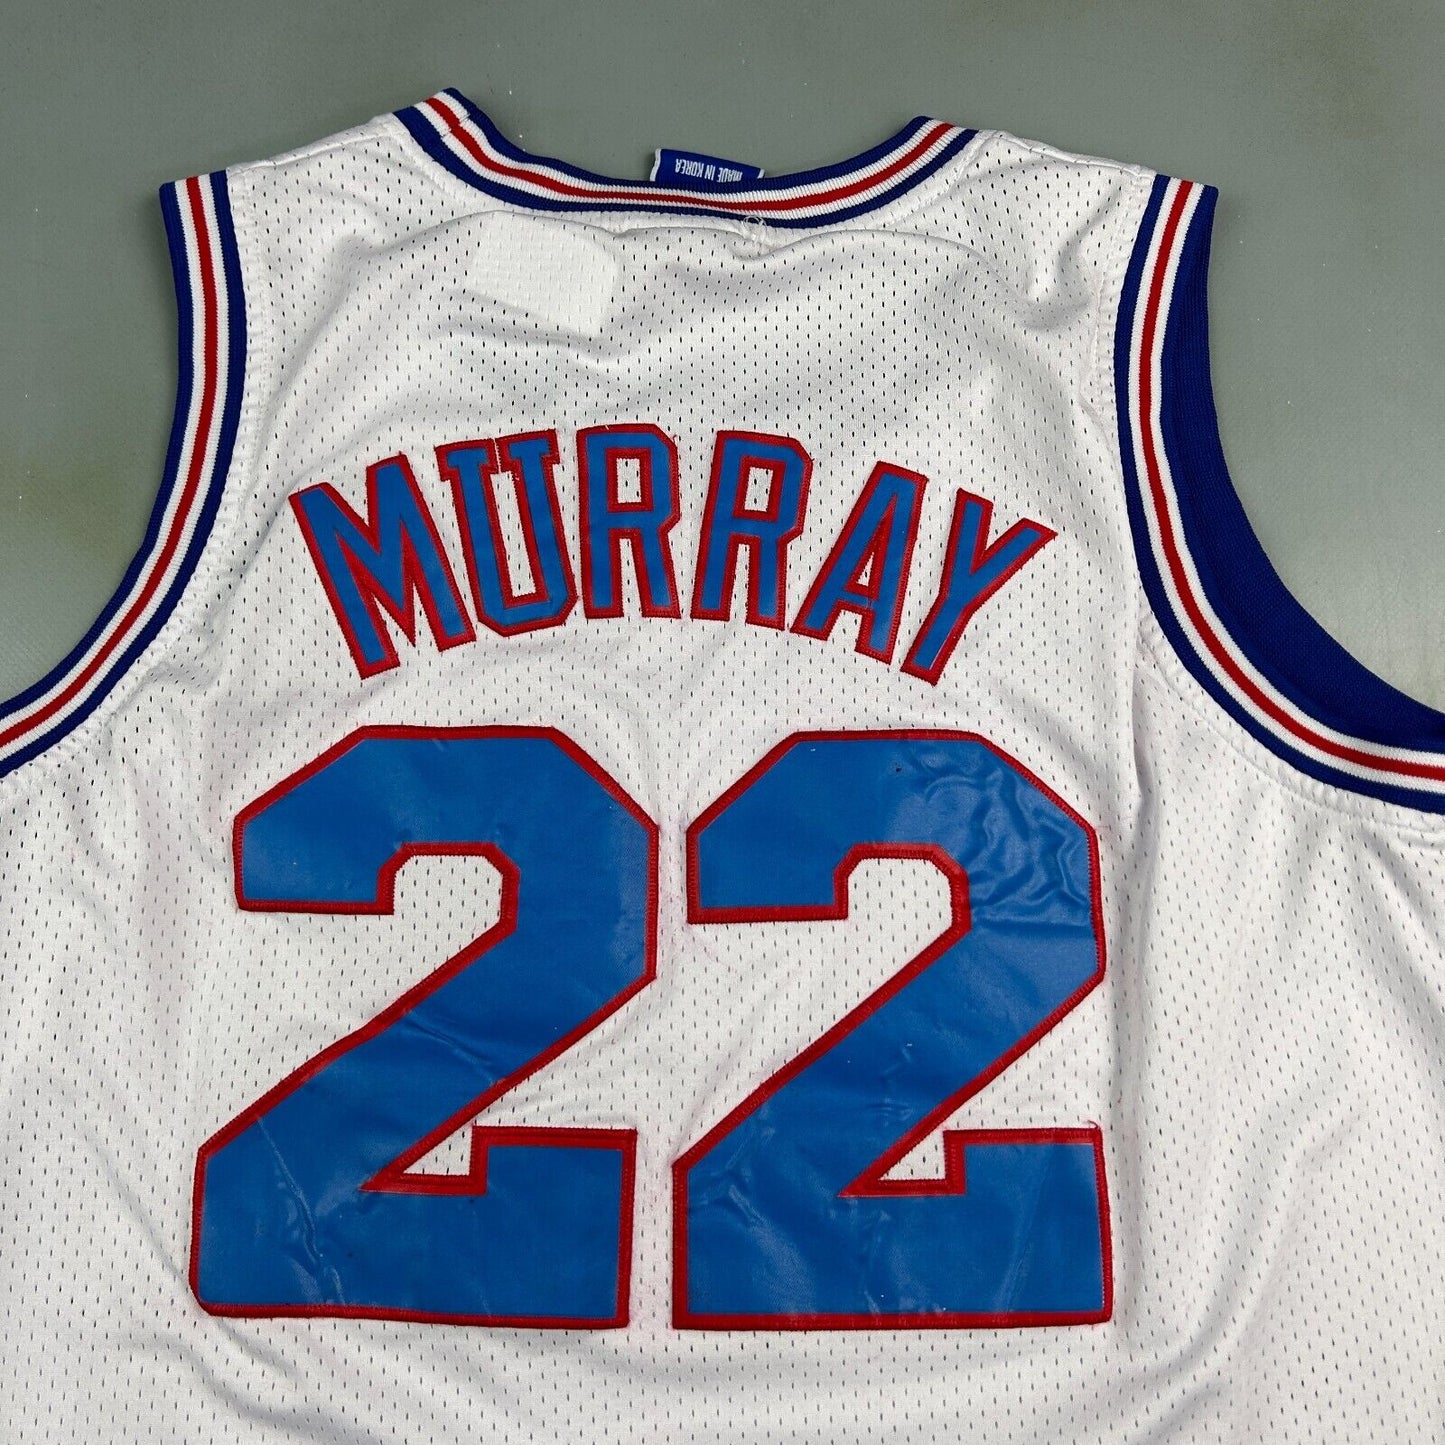 VINTAGE 90s | Tune Squad #22 Murray Champion Basketball Jersey sz M Adult